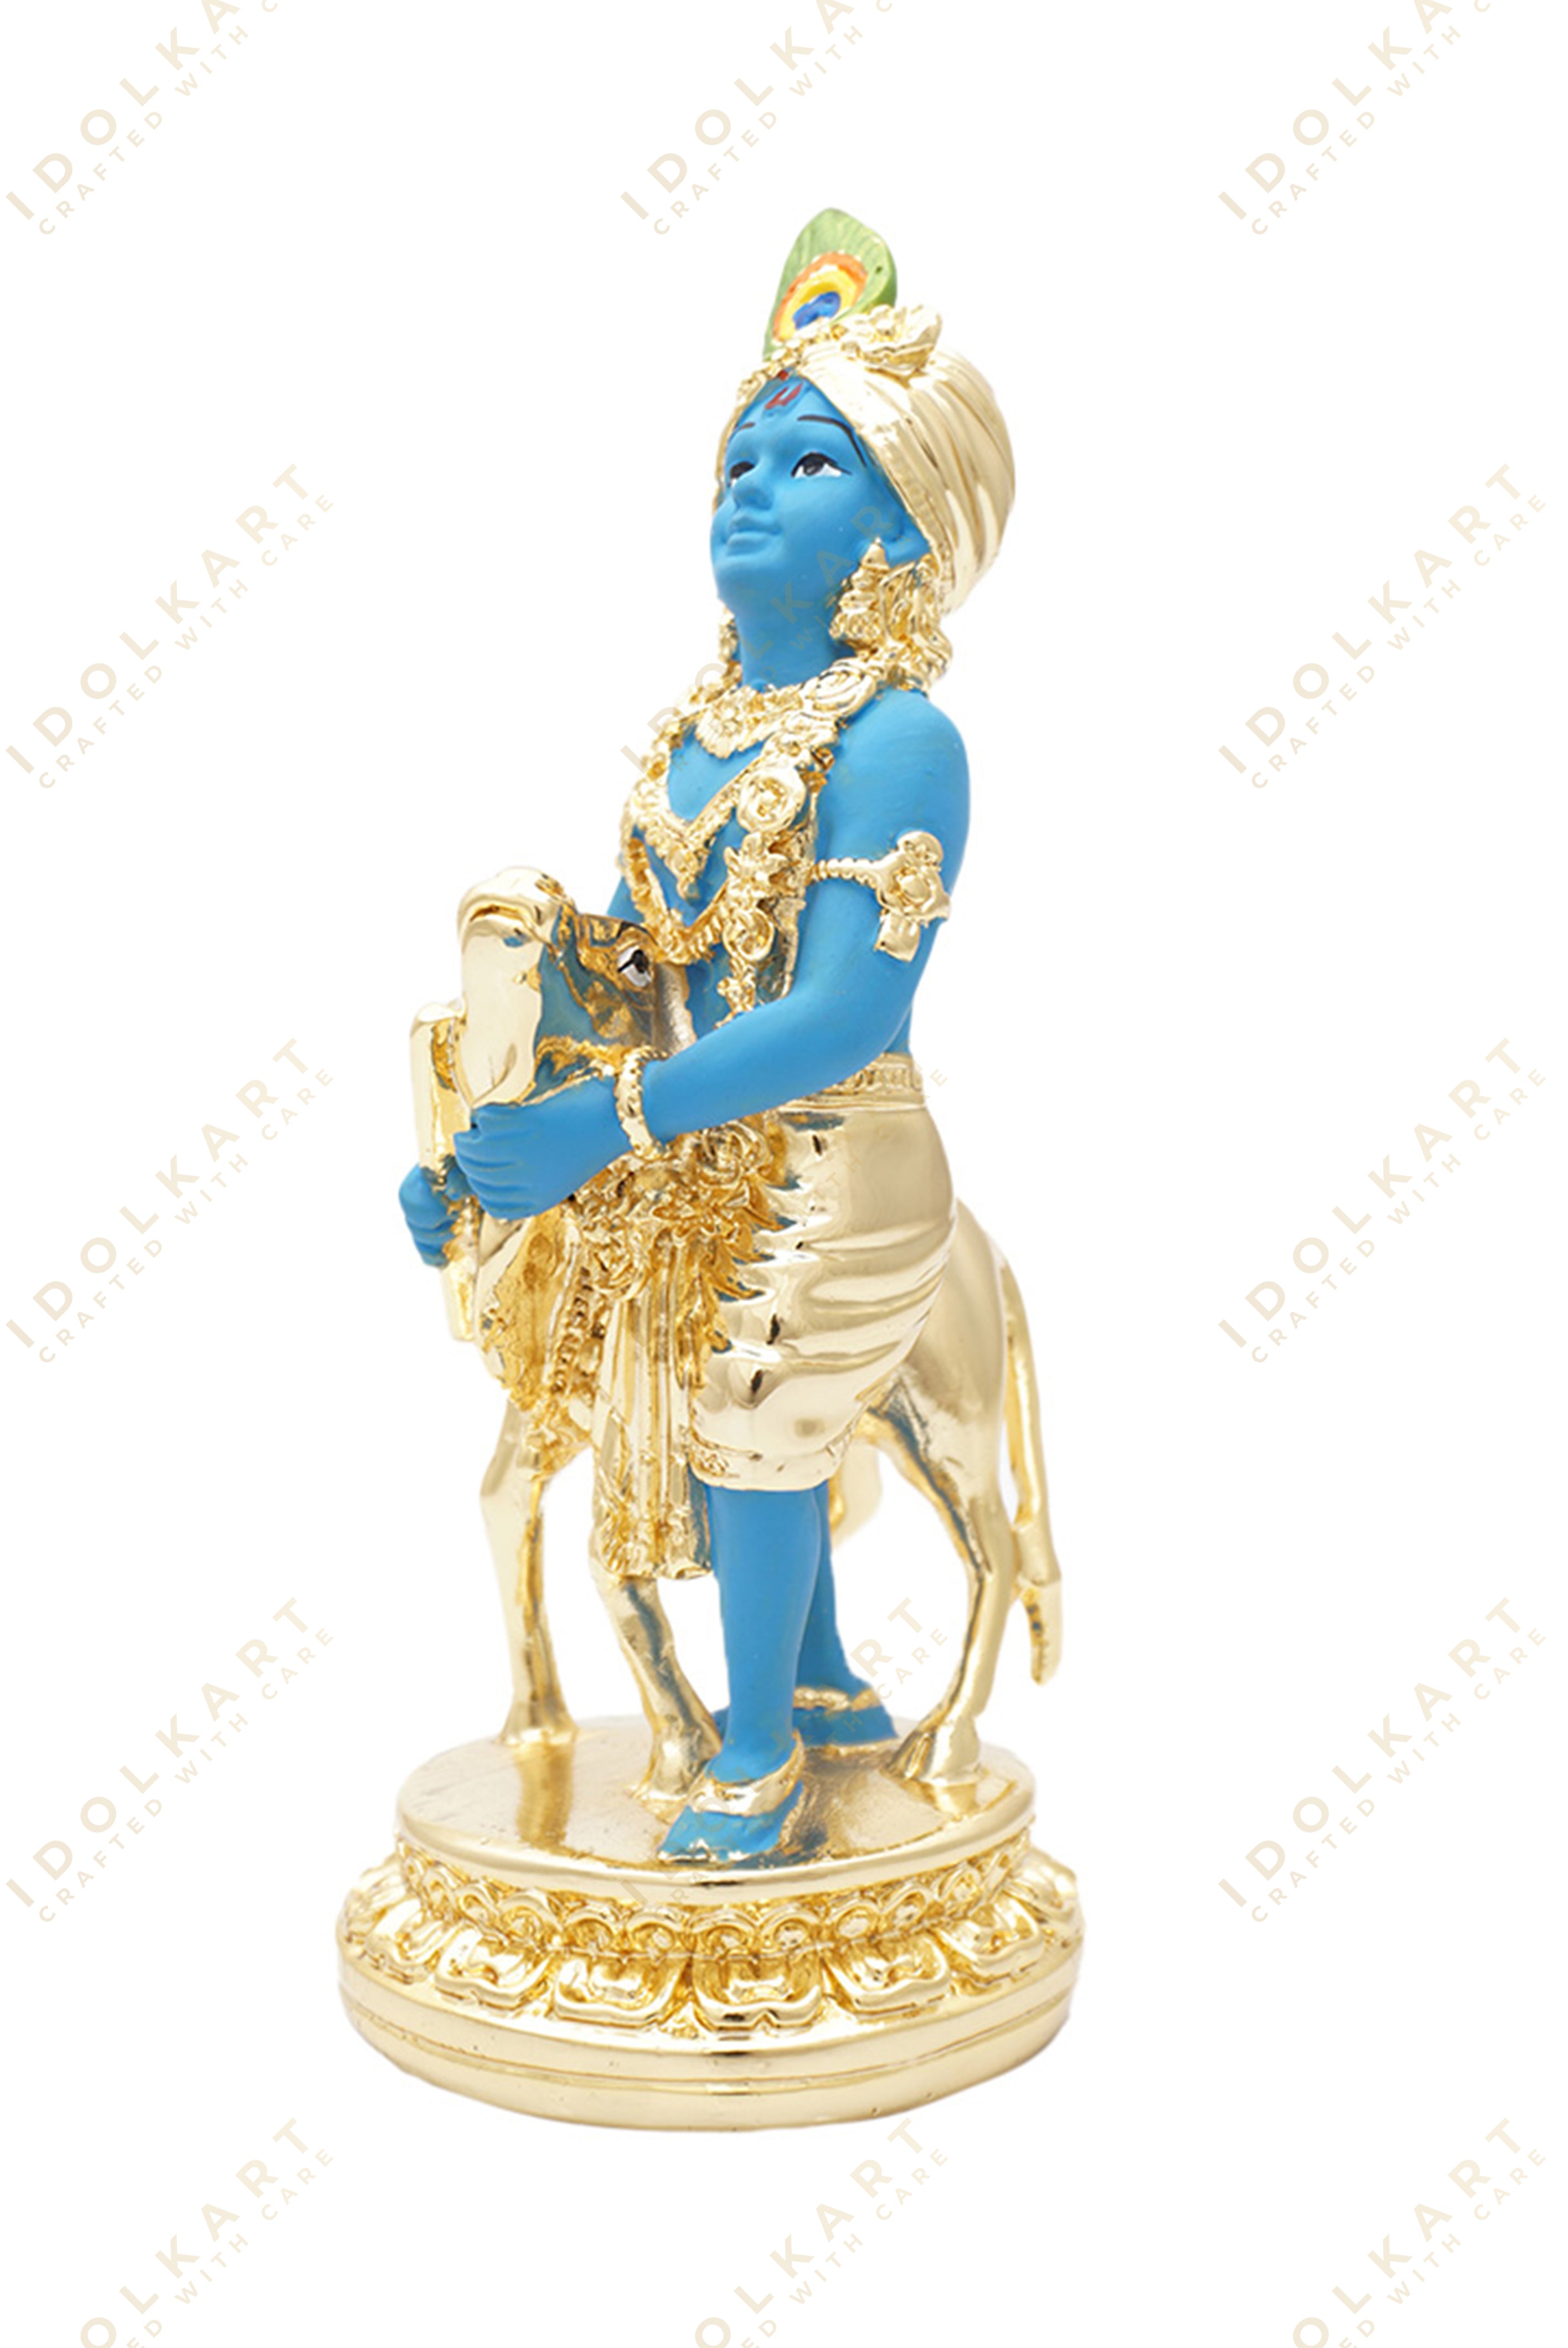 Gold Coated Krishna with Cow Idol - 6 Inch